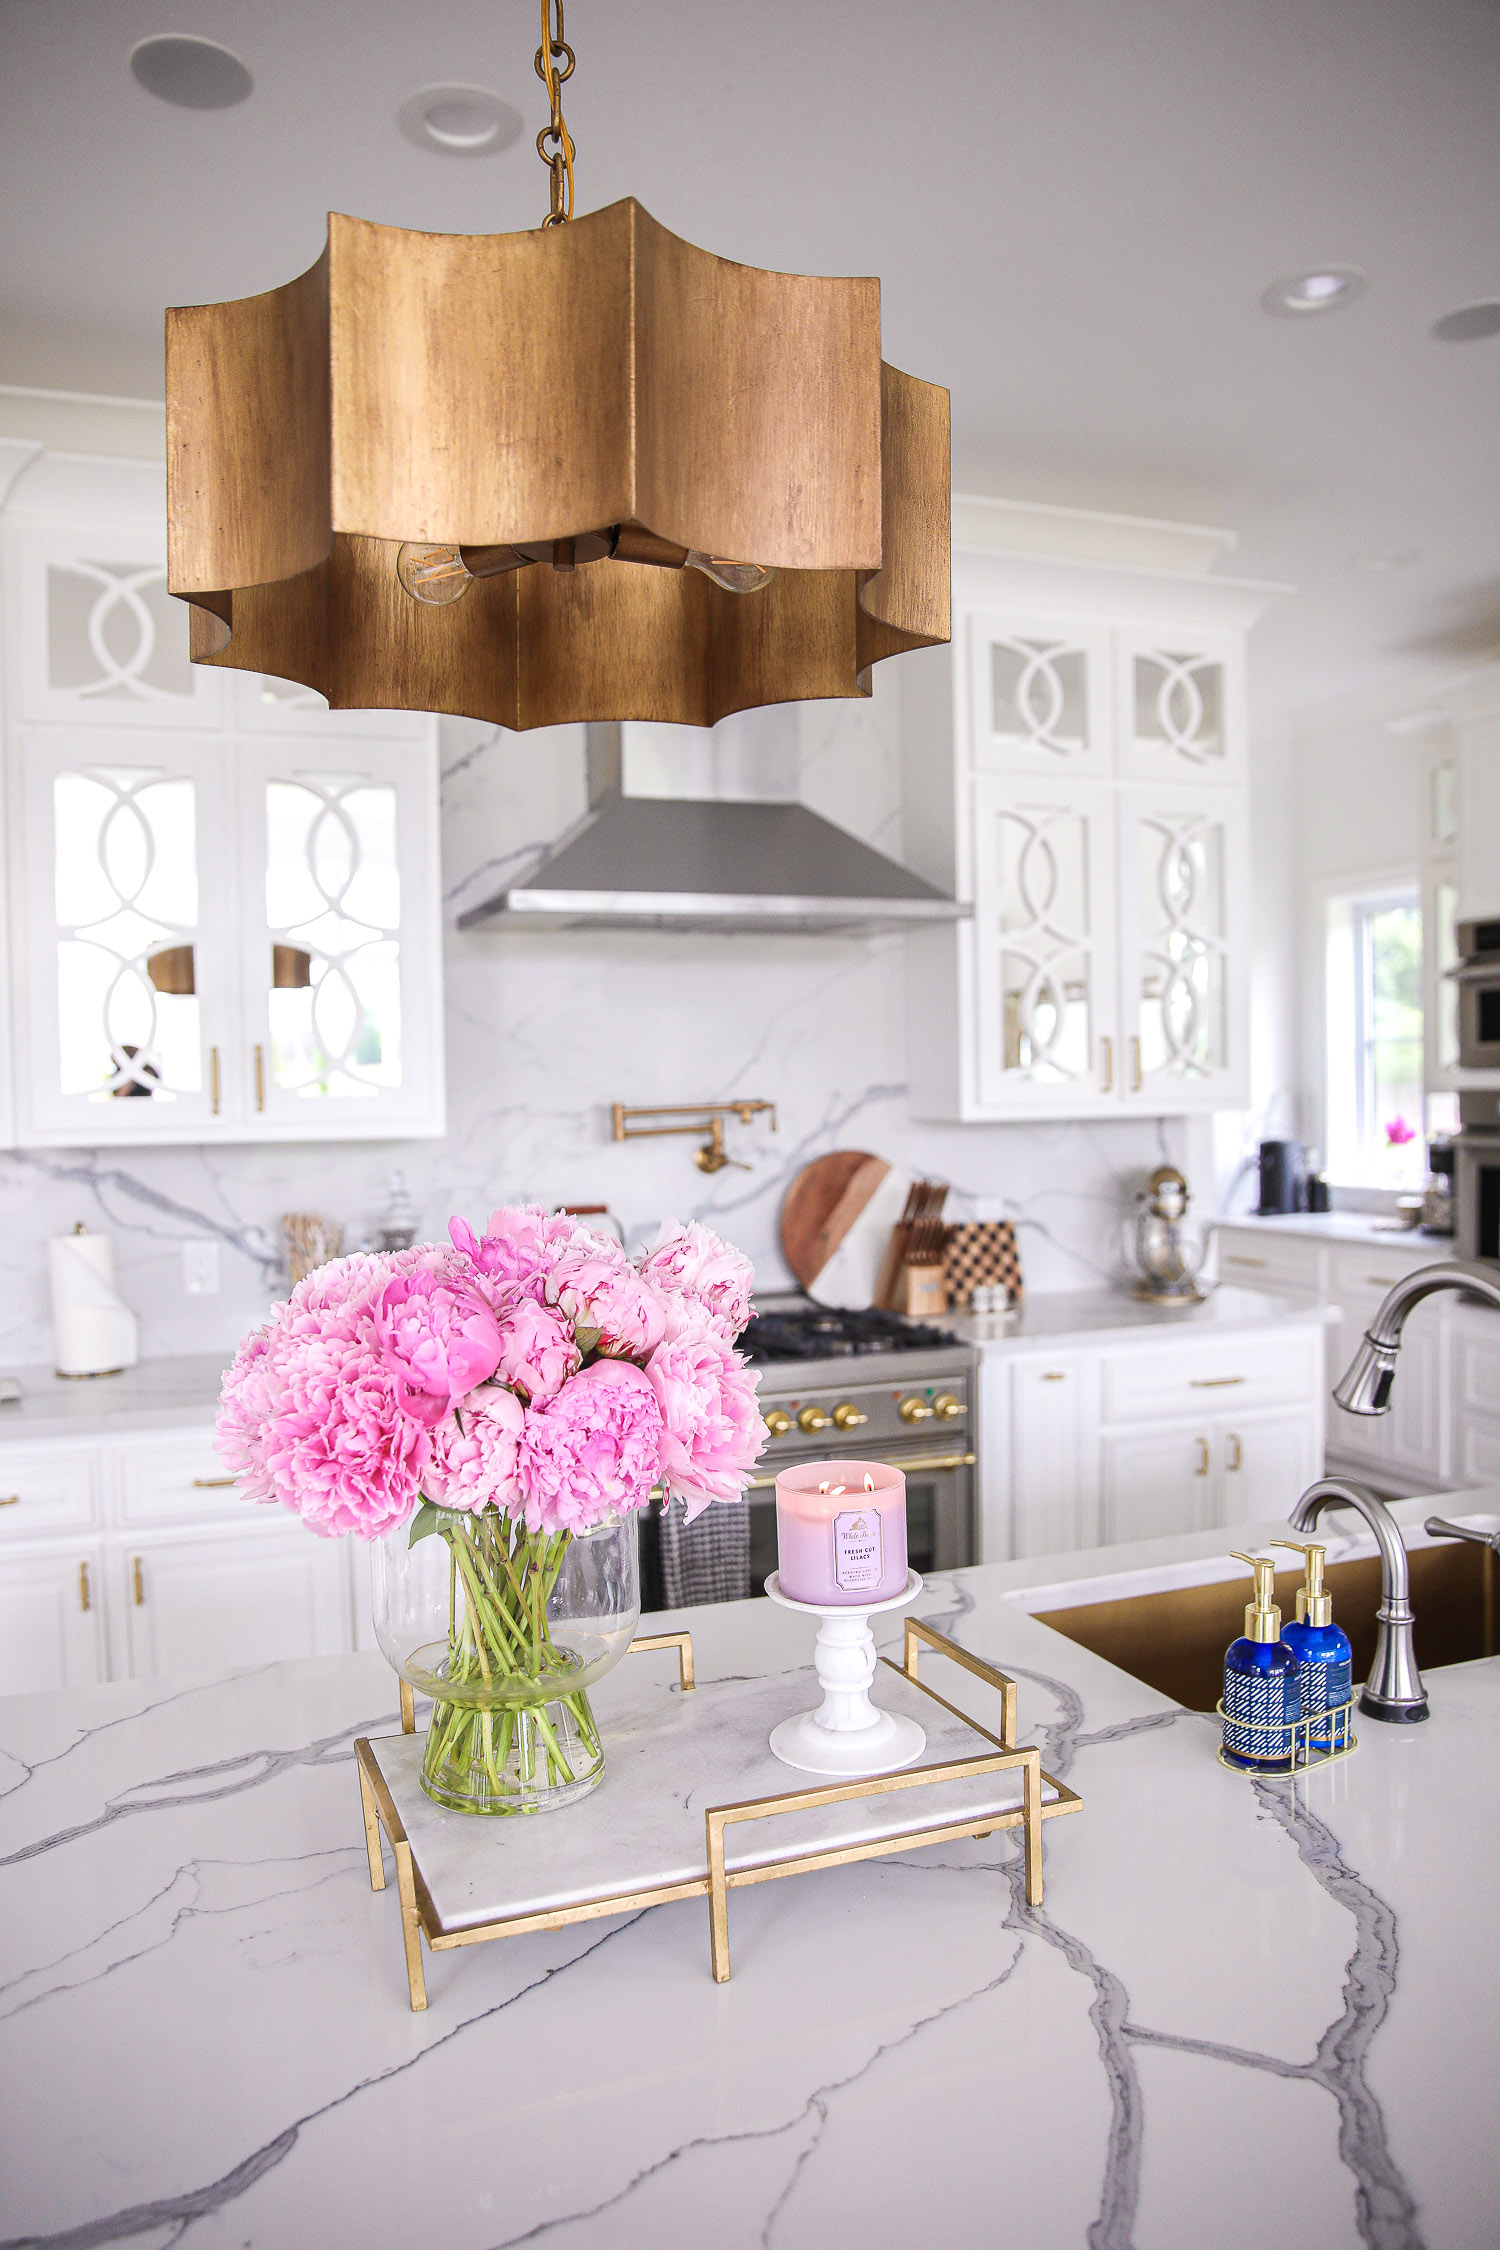 Pinterest white kitchen quartz, ilv majestic stove, Emily Gemma kitchen, gold kitchen sink, Emily Gemma kitchen, grey and gold barstools | Spring Kitchen by popular US life and style blog: image of a kitchen with white cabinets, wood flooring, wooden light pendants, marble counter tops, and light pink and blue runner rug. 